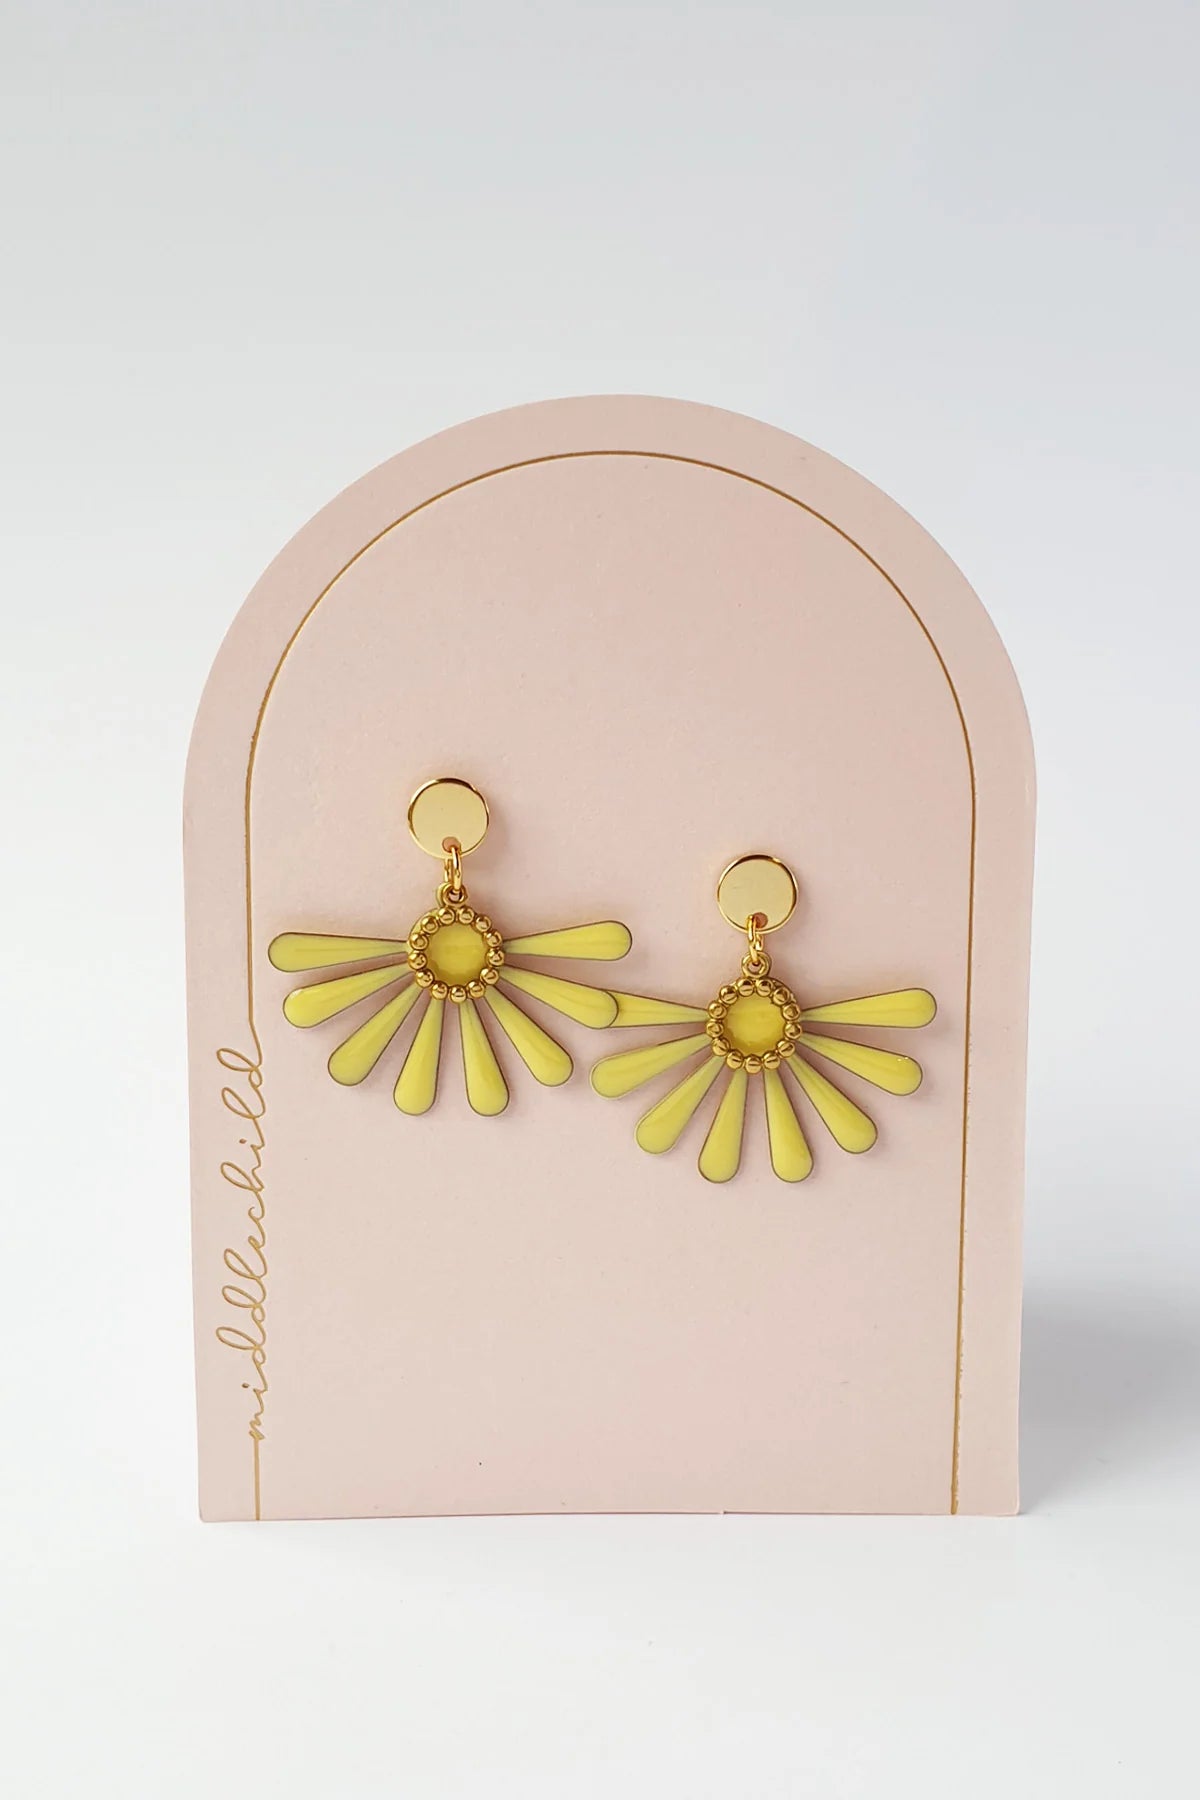 Middle Child - Flossie Earrings